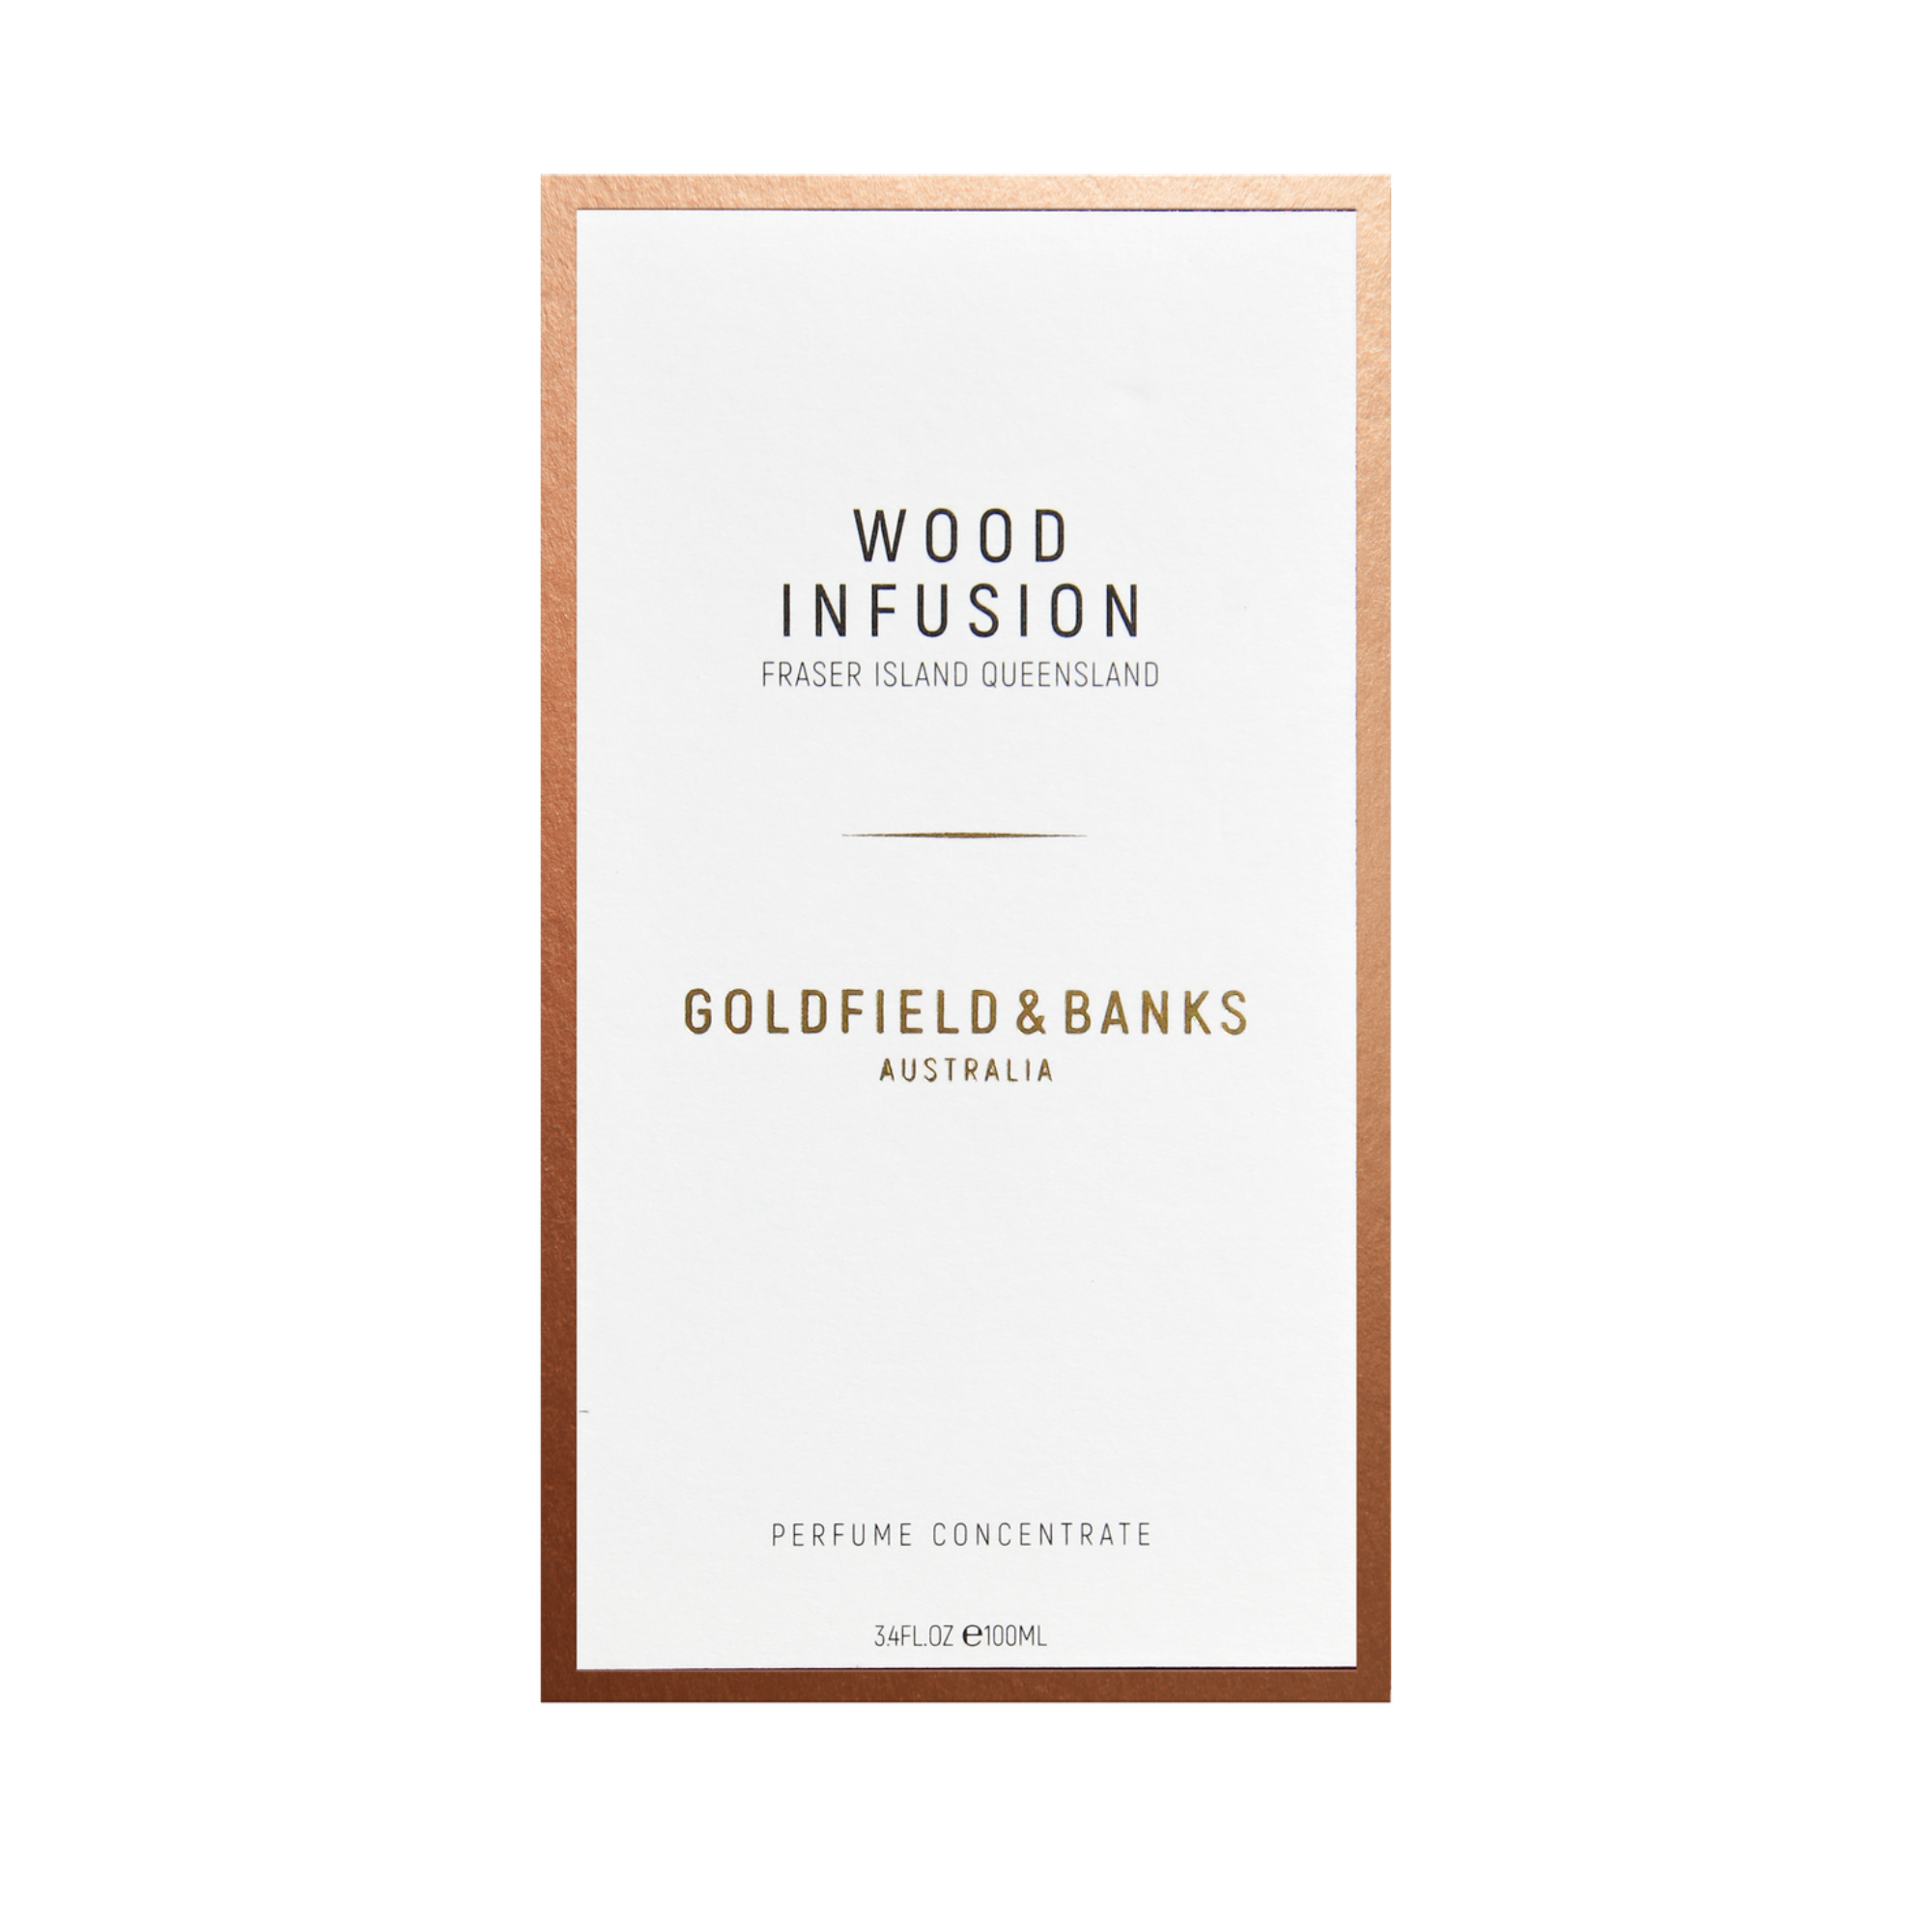 Wood Infusion Perfume Concentrate